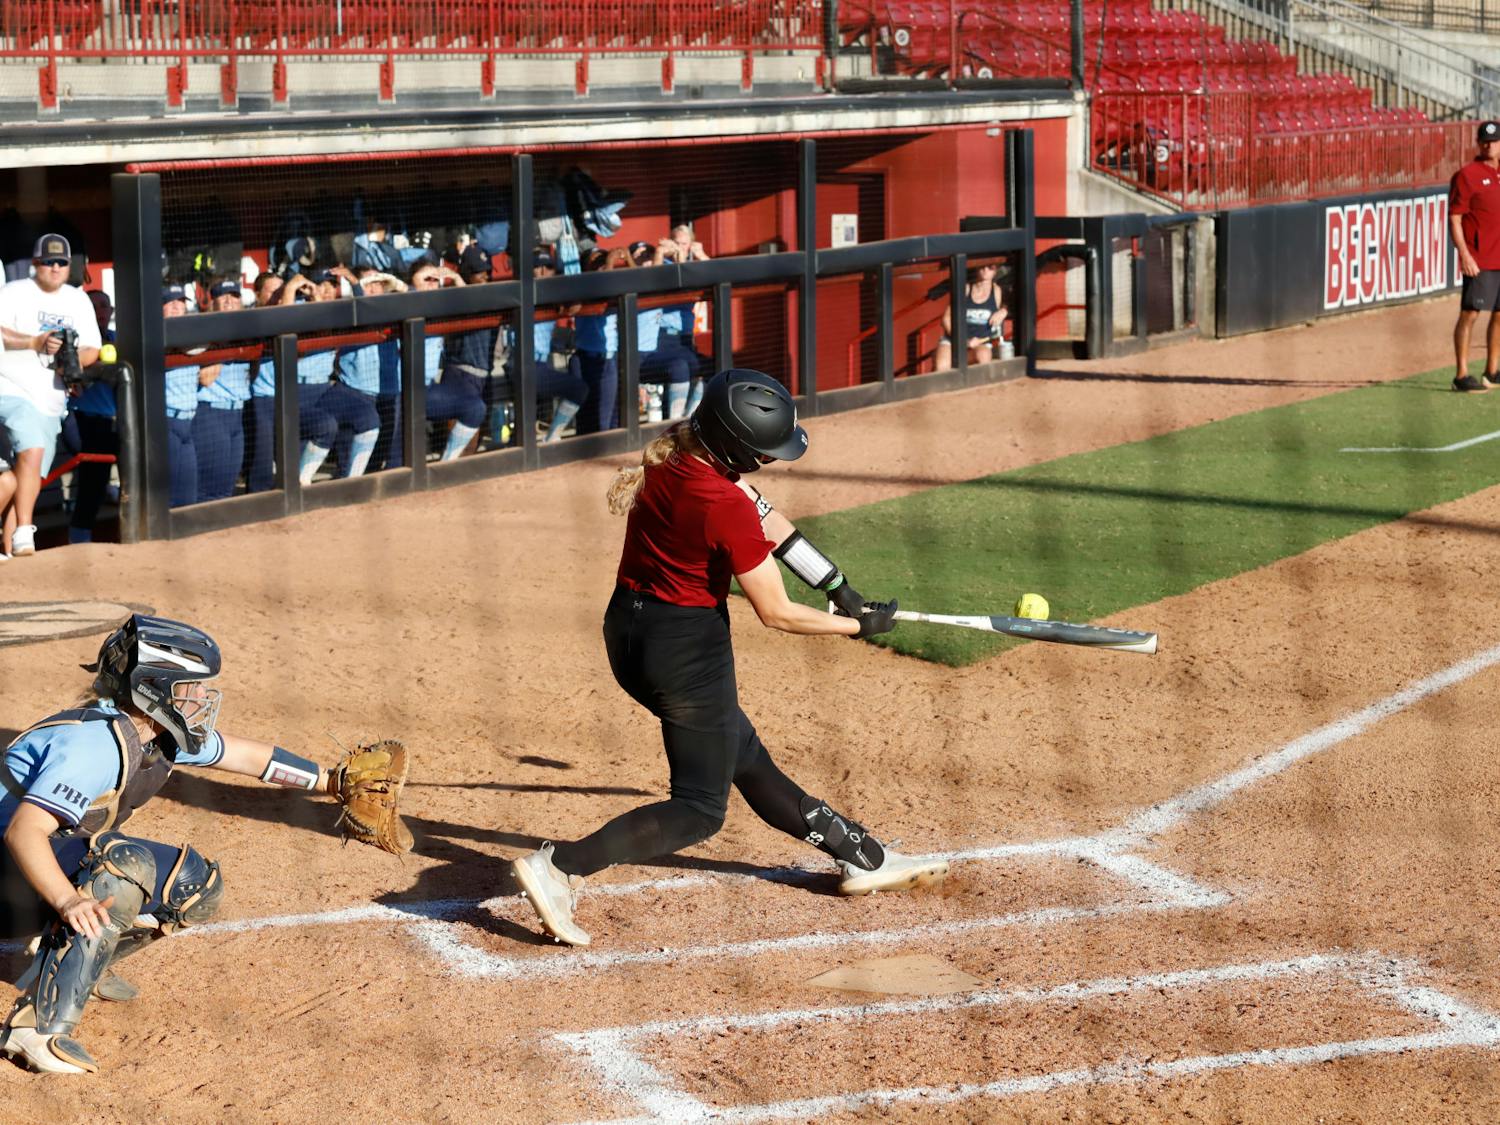 The South Carolina Gamecocks softball team took on USC Beaufort and Wofford in back-to-back exhibition games on Saturday, Oct. 7, 2023. South Carolina defeated USC Beaufort 3-0 and Wofford 14-0.